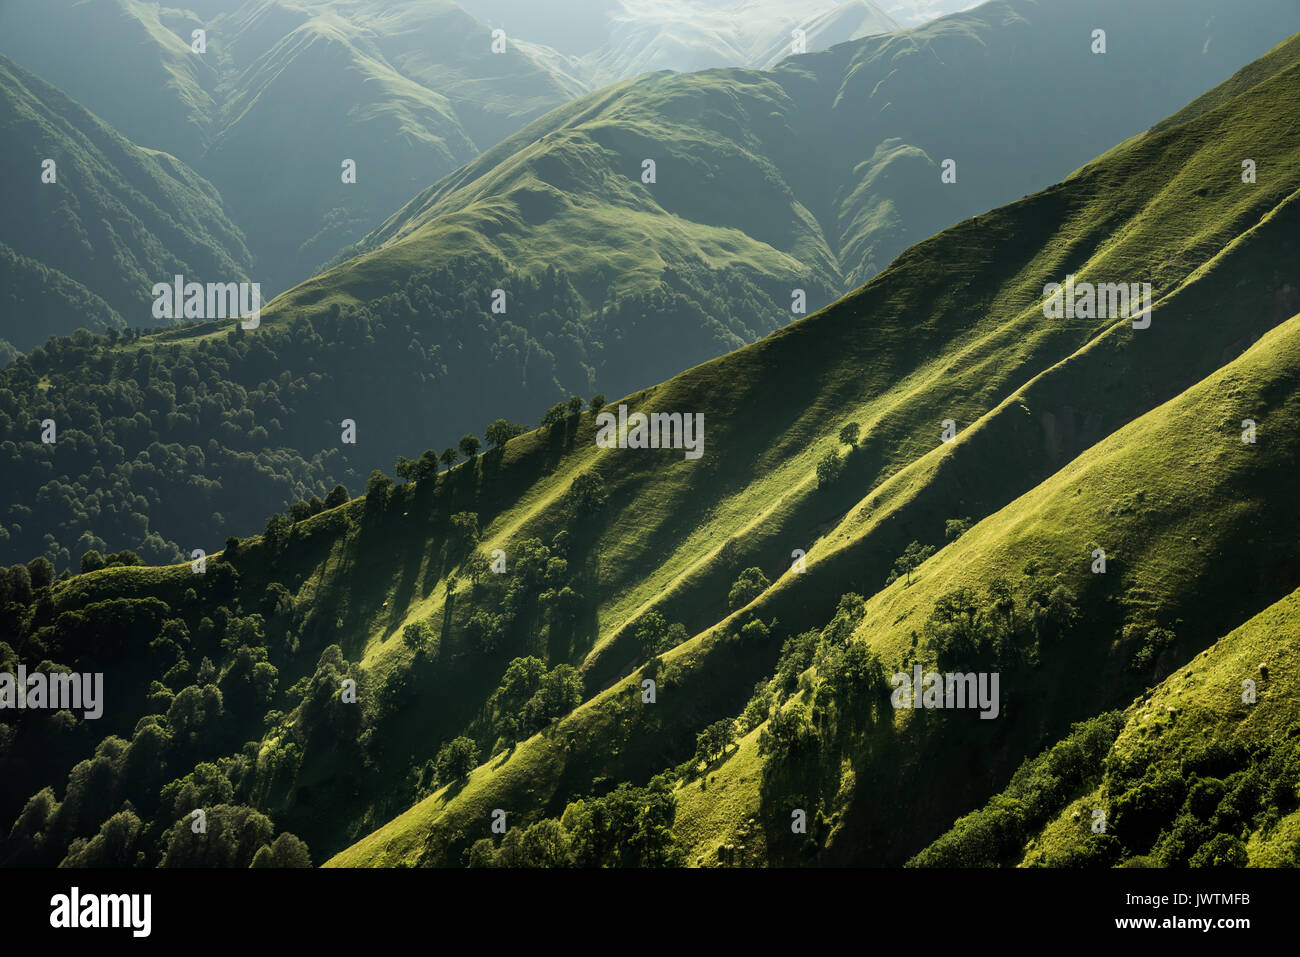 Scenery with old traditional stone towers and houses in rural village Ushguli. Mountain valley with green pastures, Svaneti region, Caucasus, Georgia Stock Photo